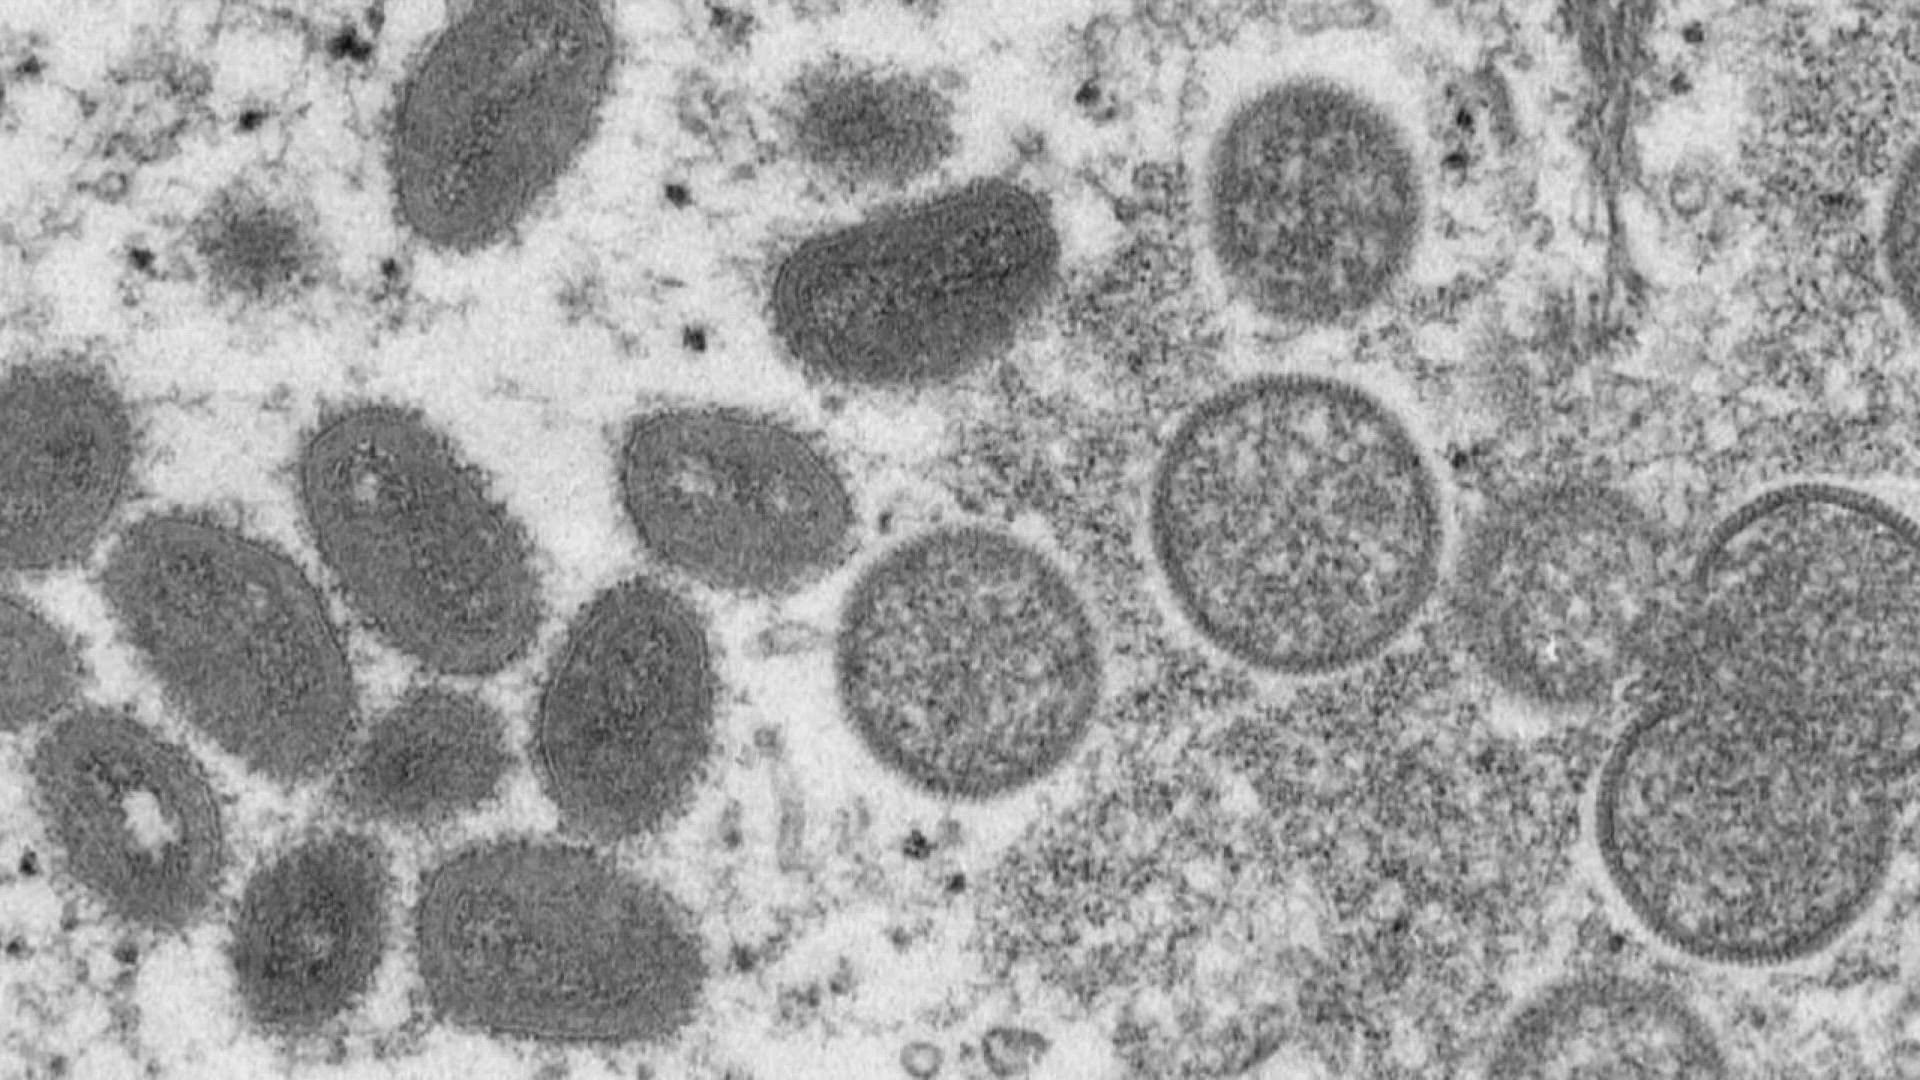 The U.S. Department of Health and Human Services announced Tuesday that it would enhance the "nationwide strategy to mitigate the spread of monkeypox."